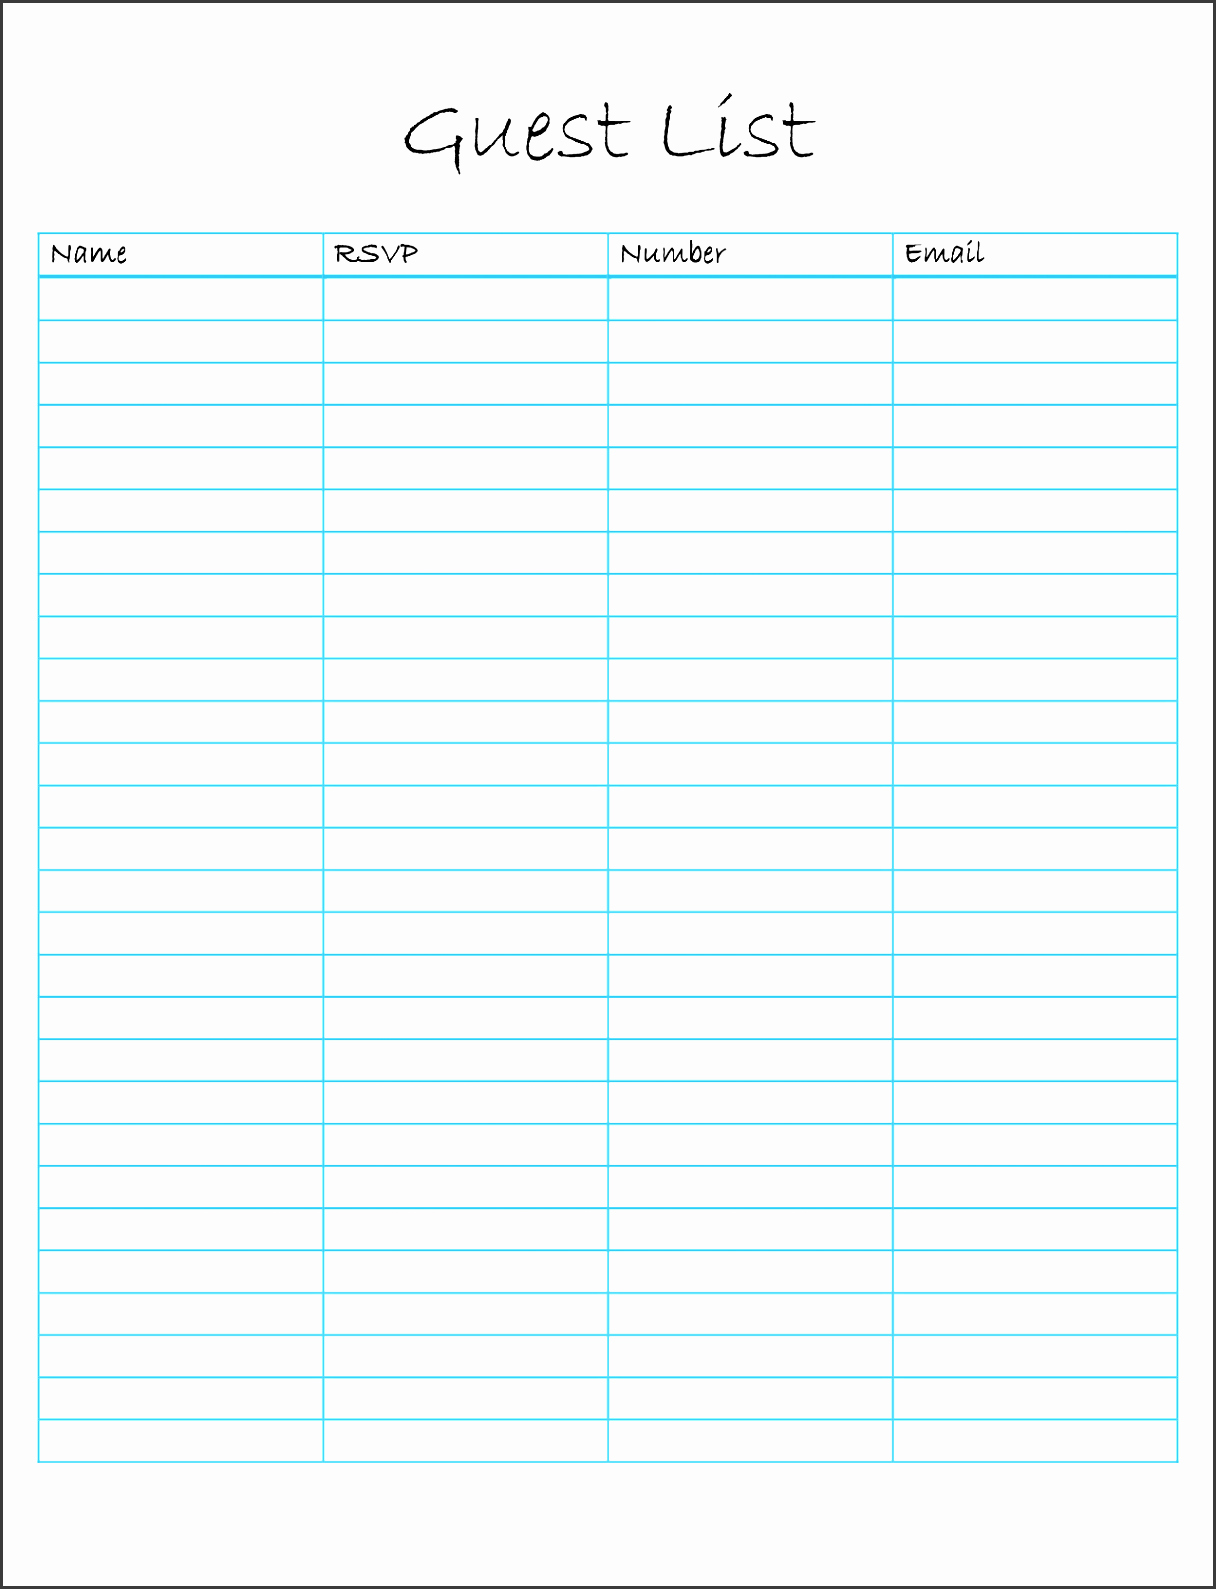 Wedding Guest List Templates Free Awesome 8 Wedding Guest List Templates Sampletemplatess